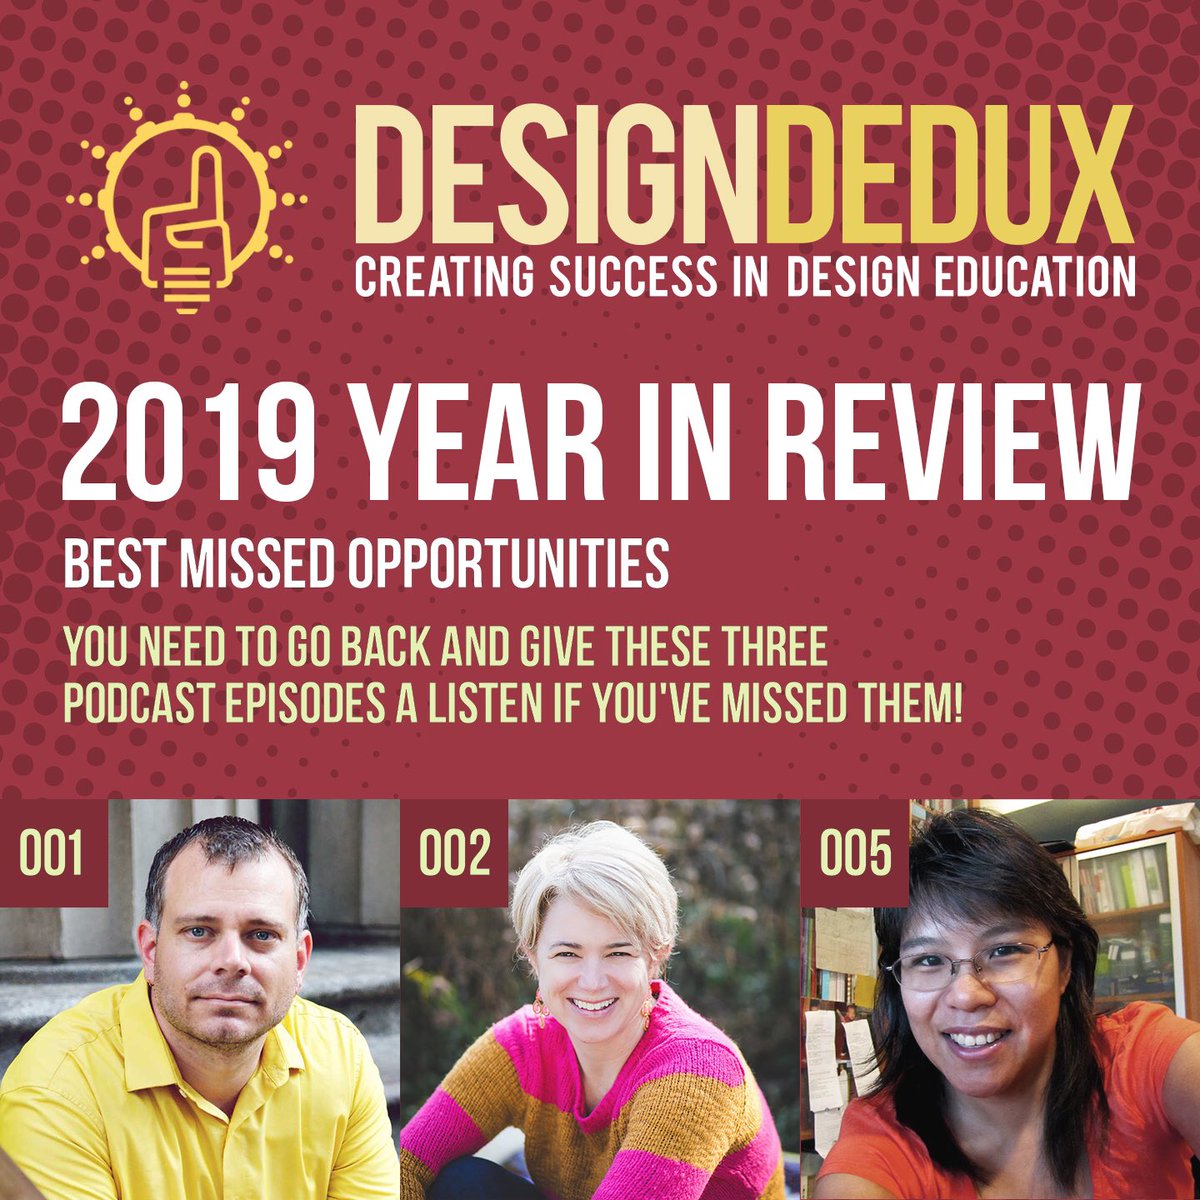 2019 Missed Opportunities: you need to go back and give these three podcast episodes a listen if you've missed them! designdedux.com
#designdedux #jointheconversation #creatingsuccess #designeducation #podcast